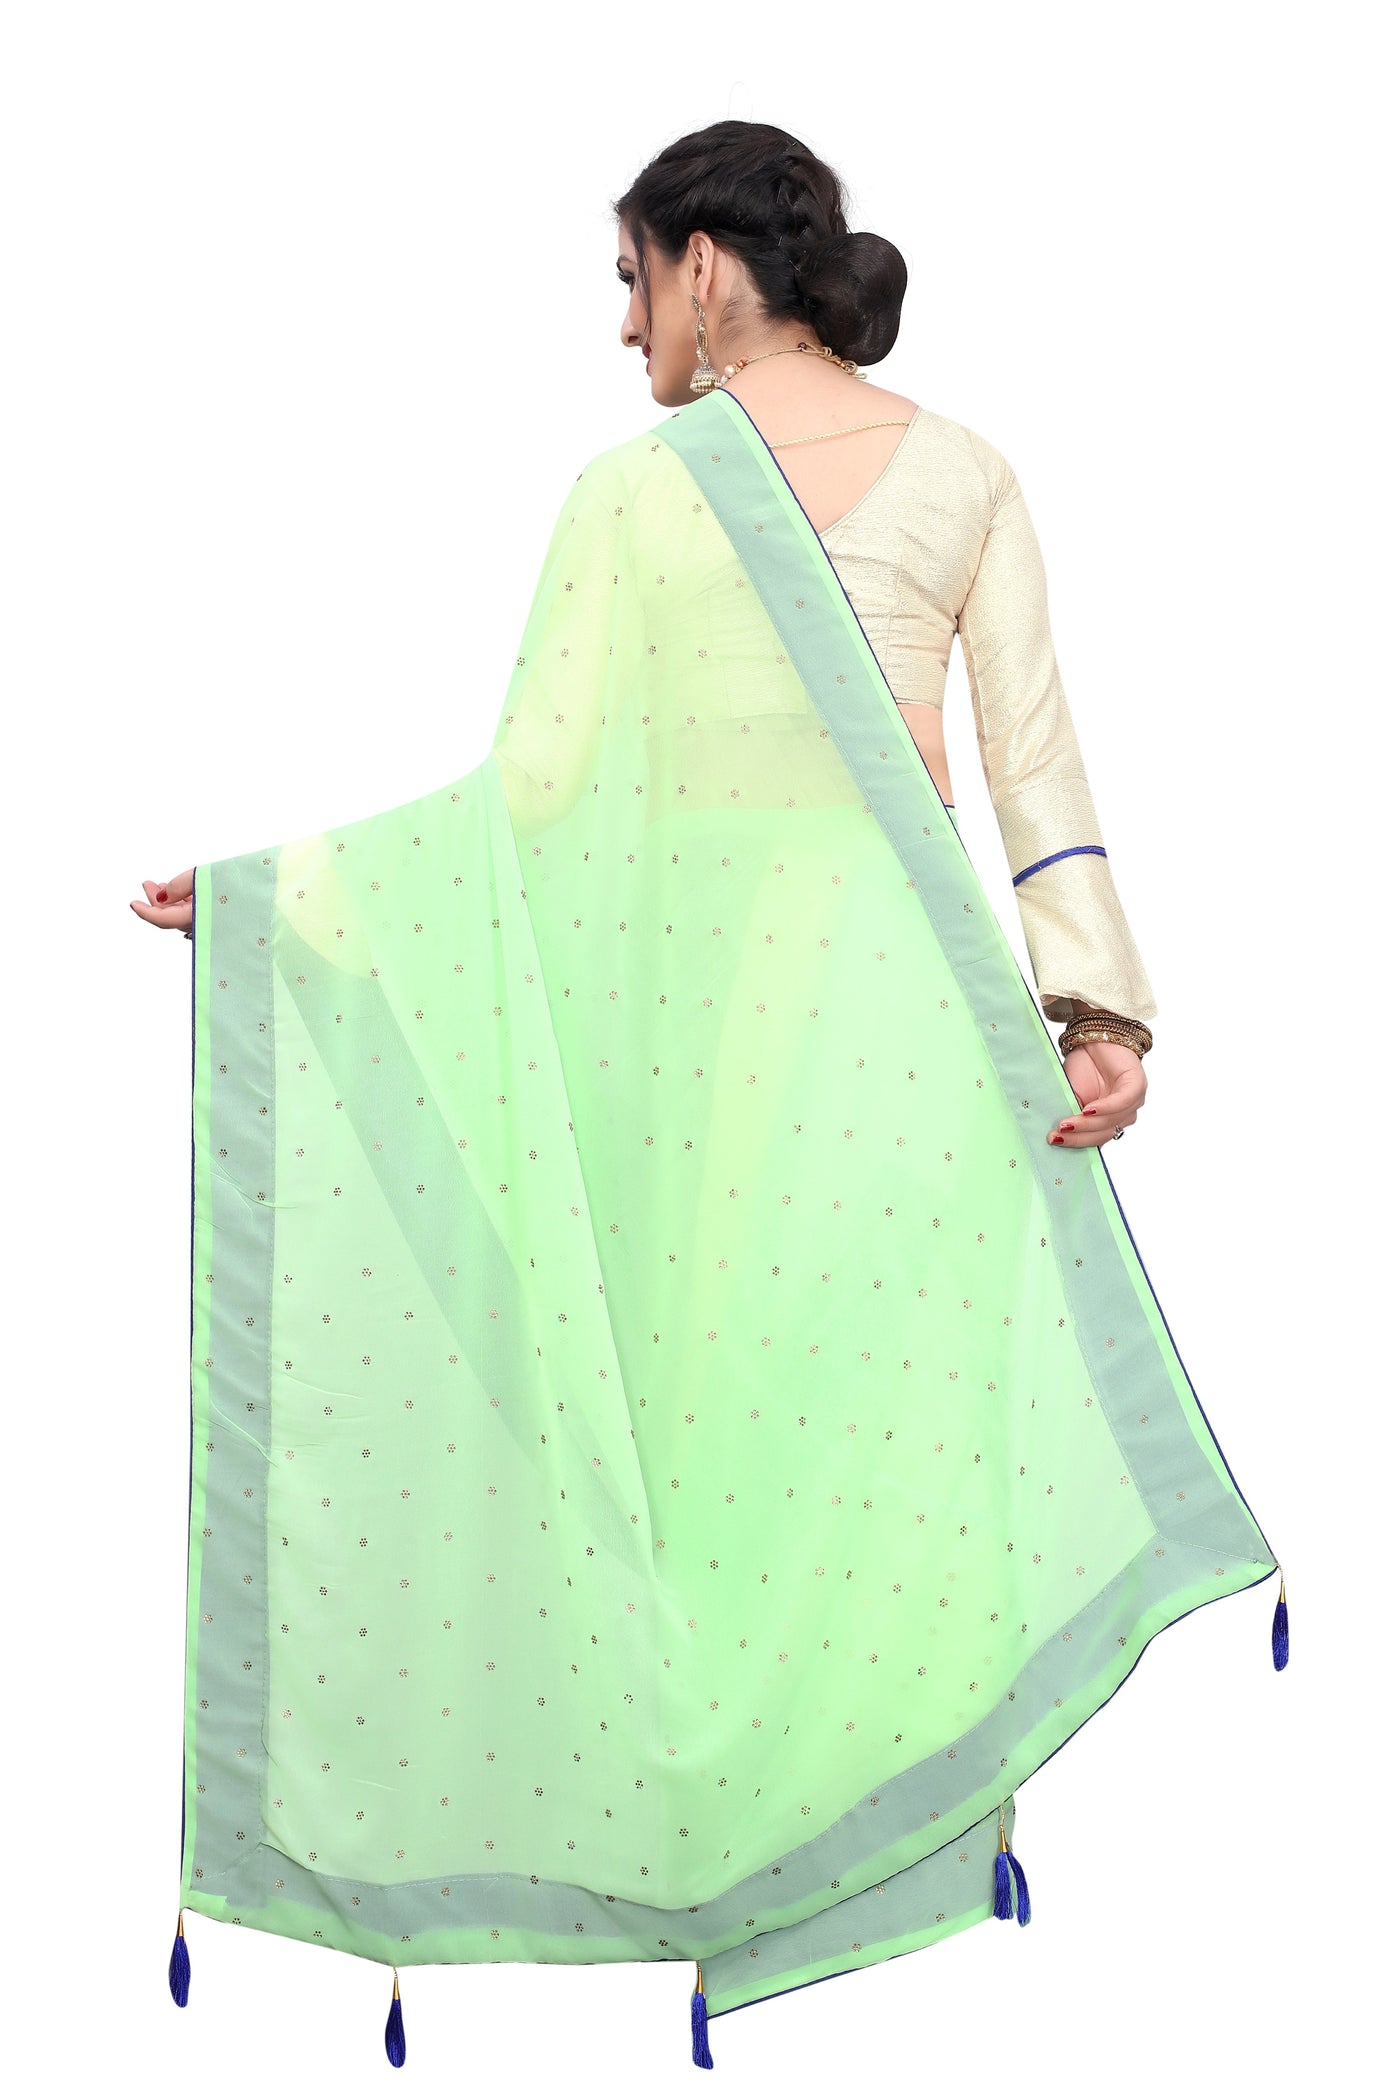 Georgette Green Saree With Blouse